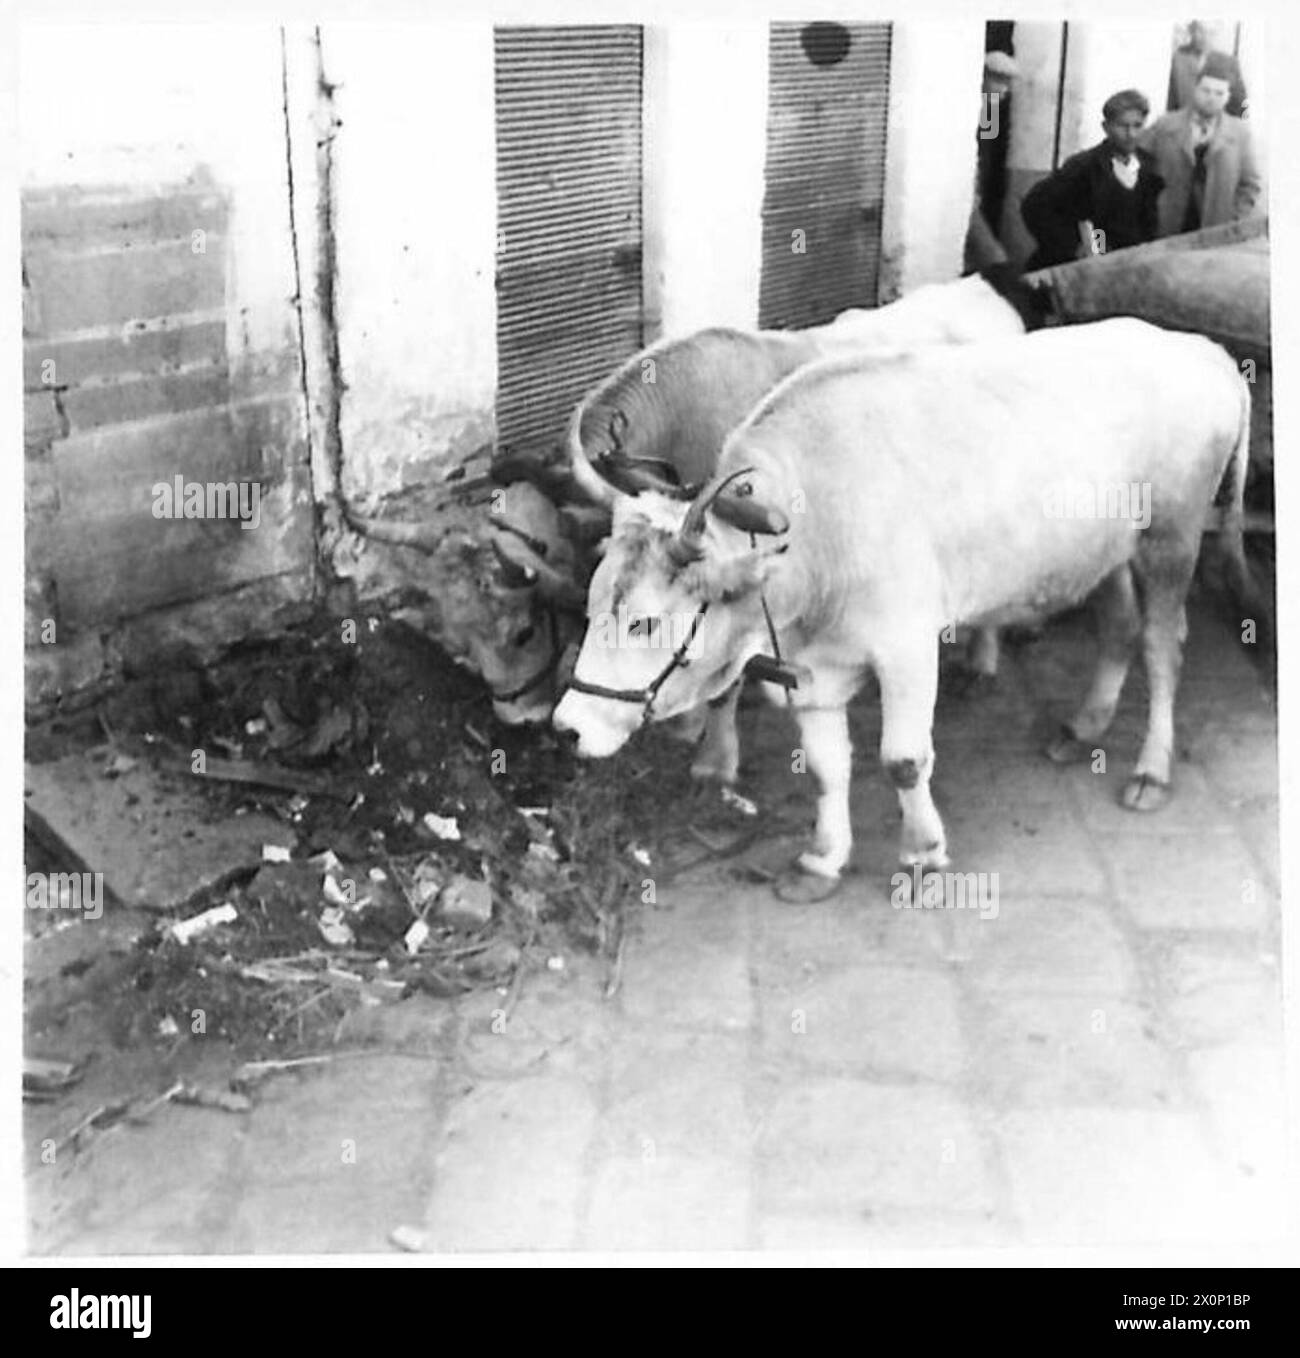 THE HUSK THAT WAS GREECE - Animals have to scavenge for food among scrap heaps, and these oxen are no exception. Photographic negative , British Army Stock Photo